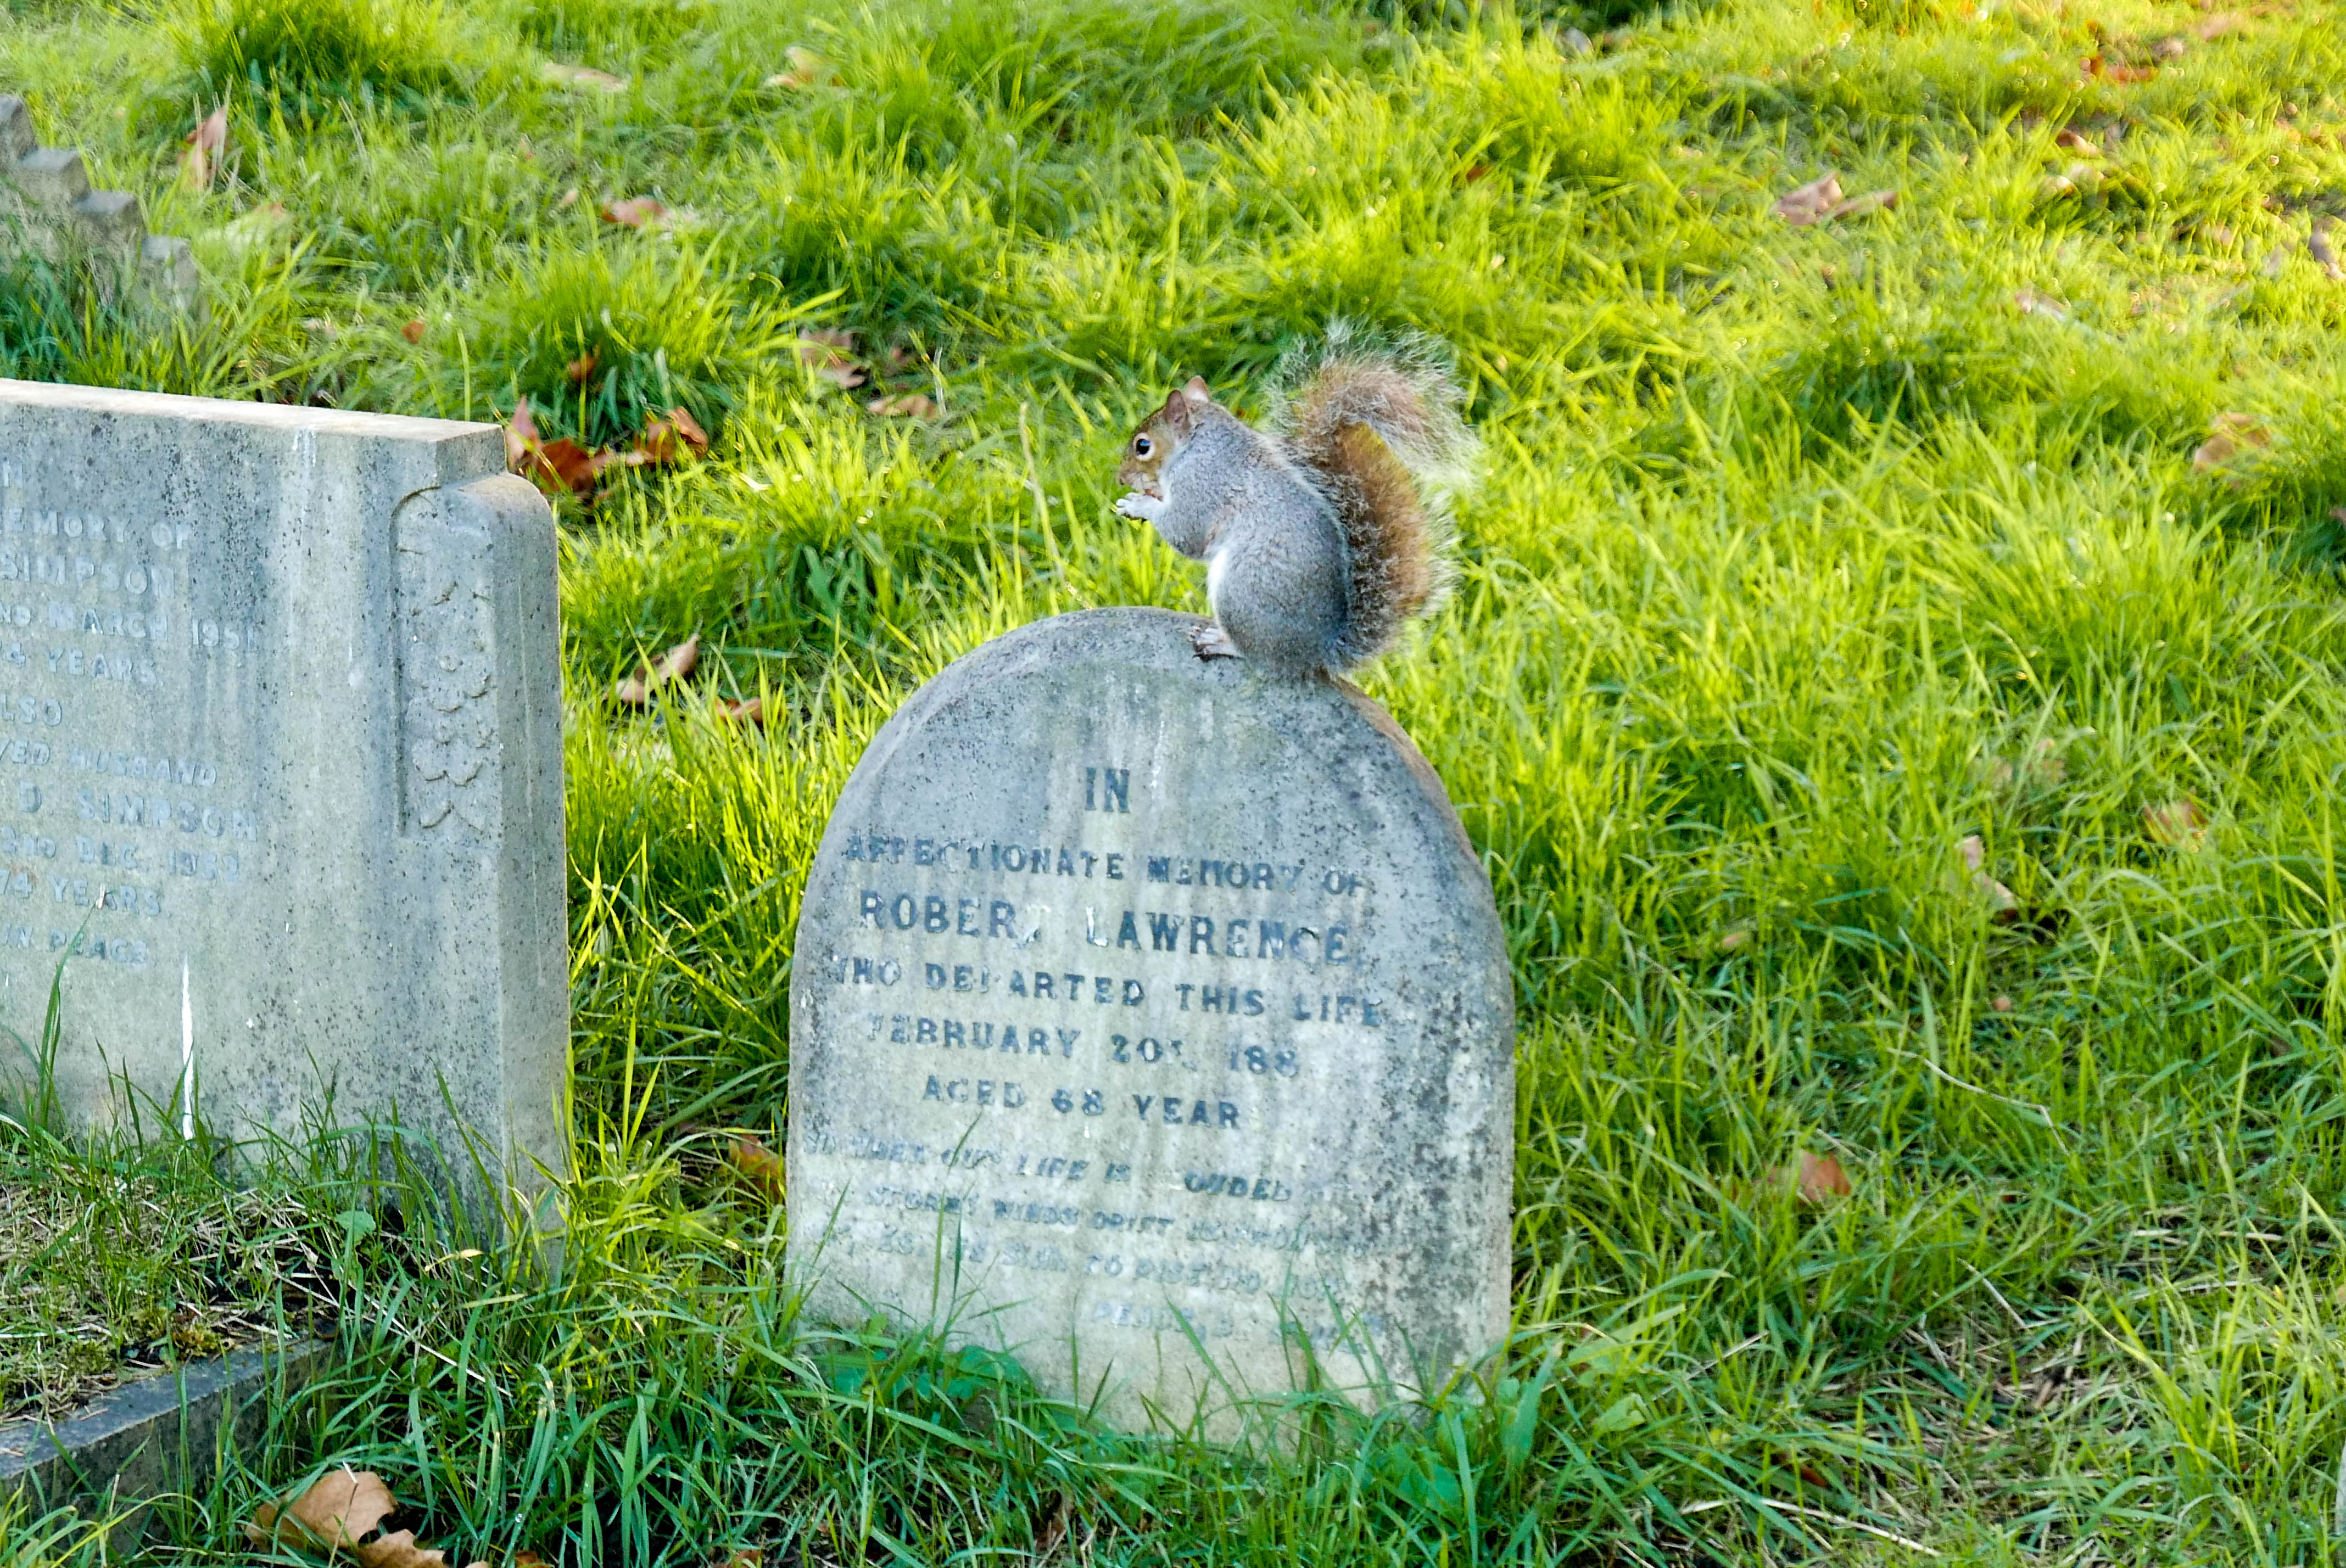 Squirrels on my mind (and visiting Brompton Cemetery)